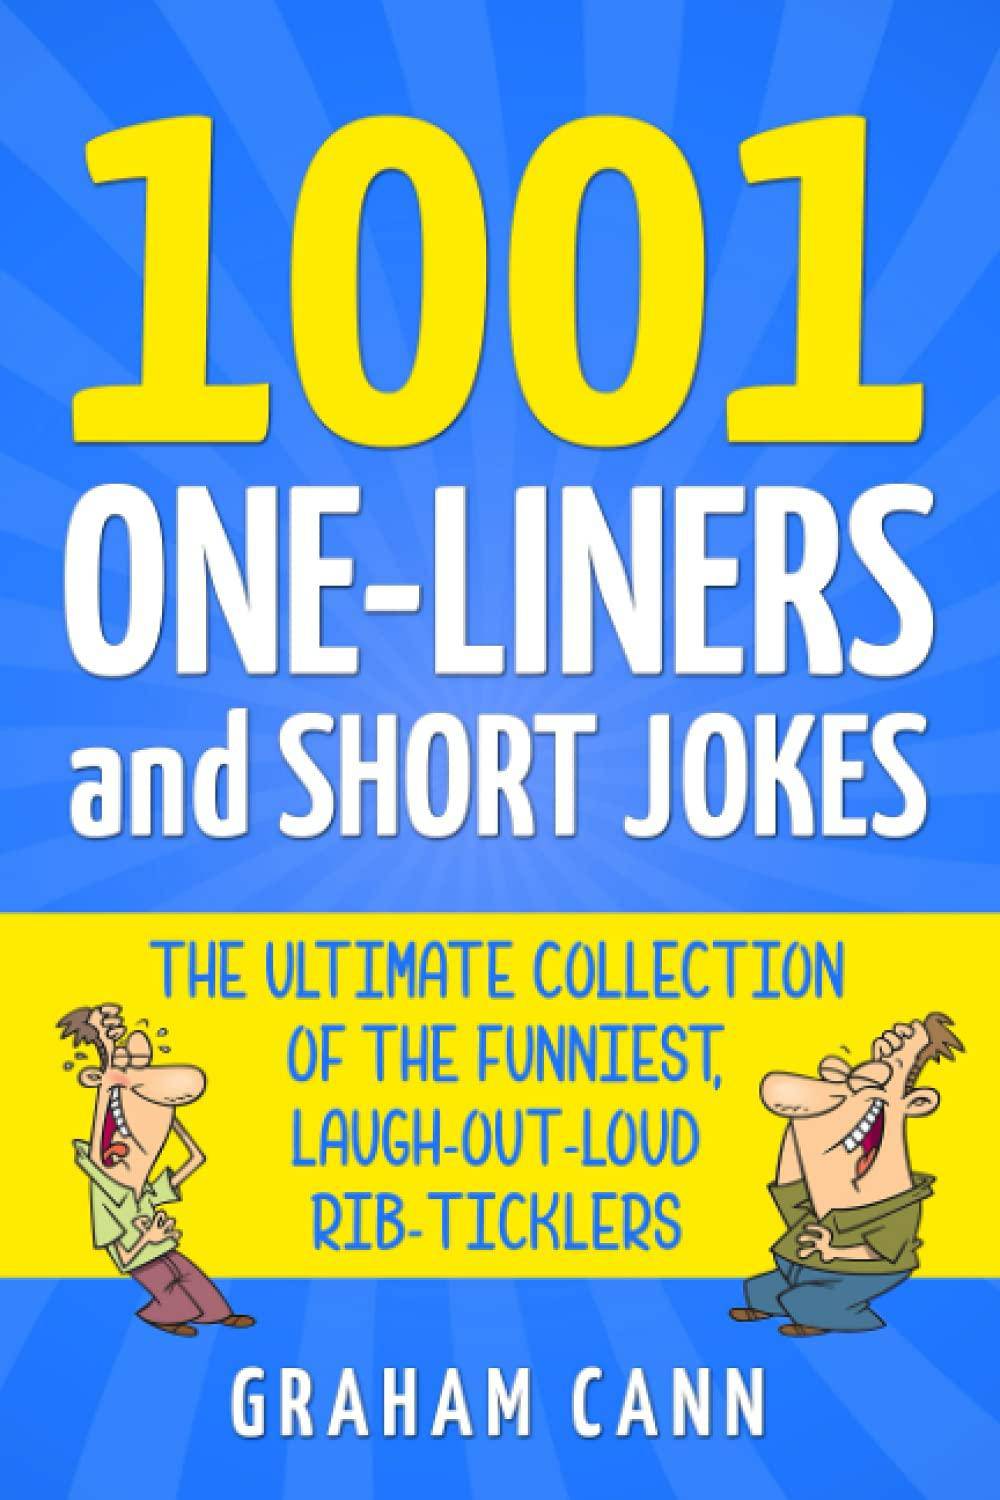 1001 One-Liners and Short Jokes: The Ultimate Collection Of The - SureShot Books Publishing LLC